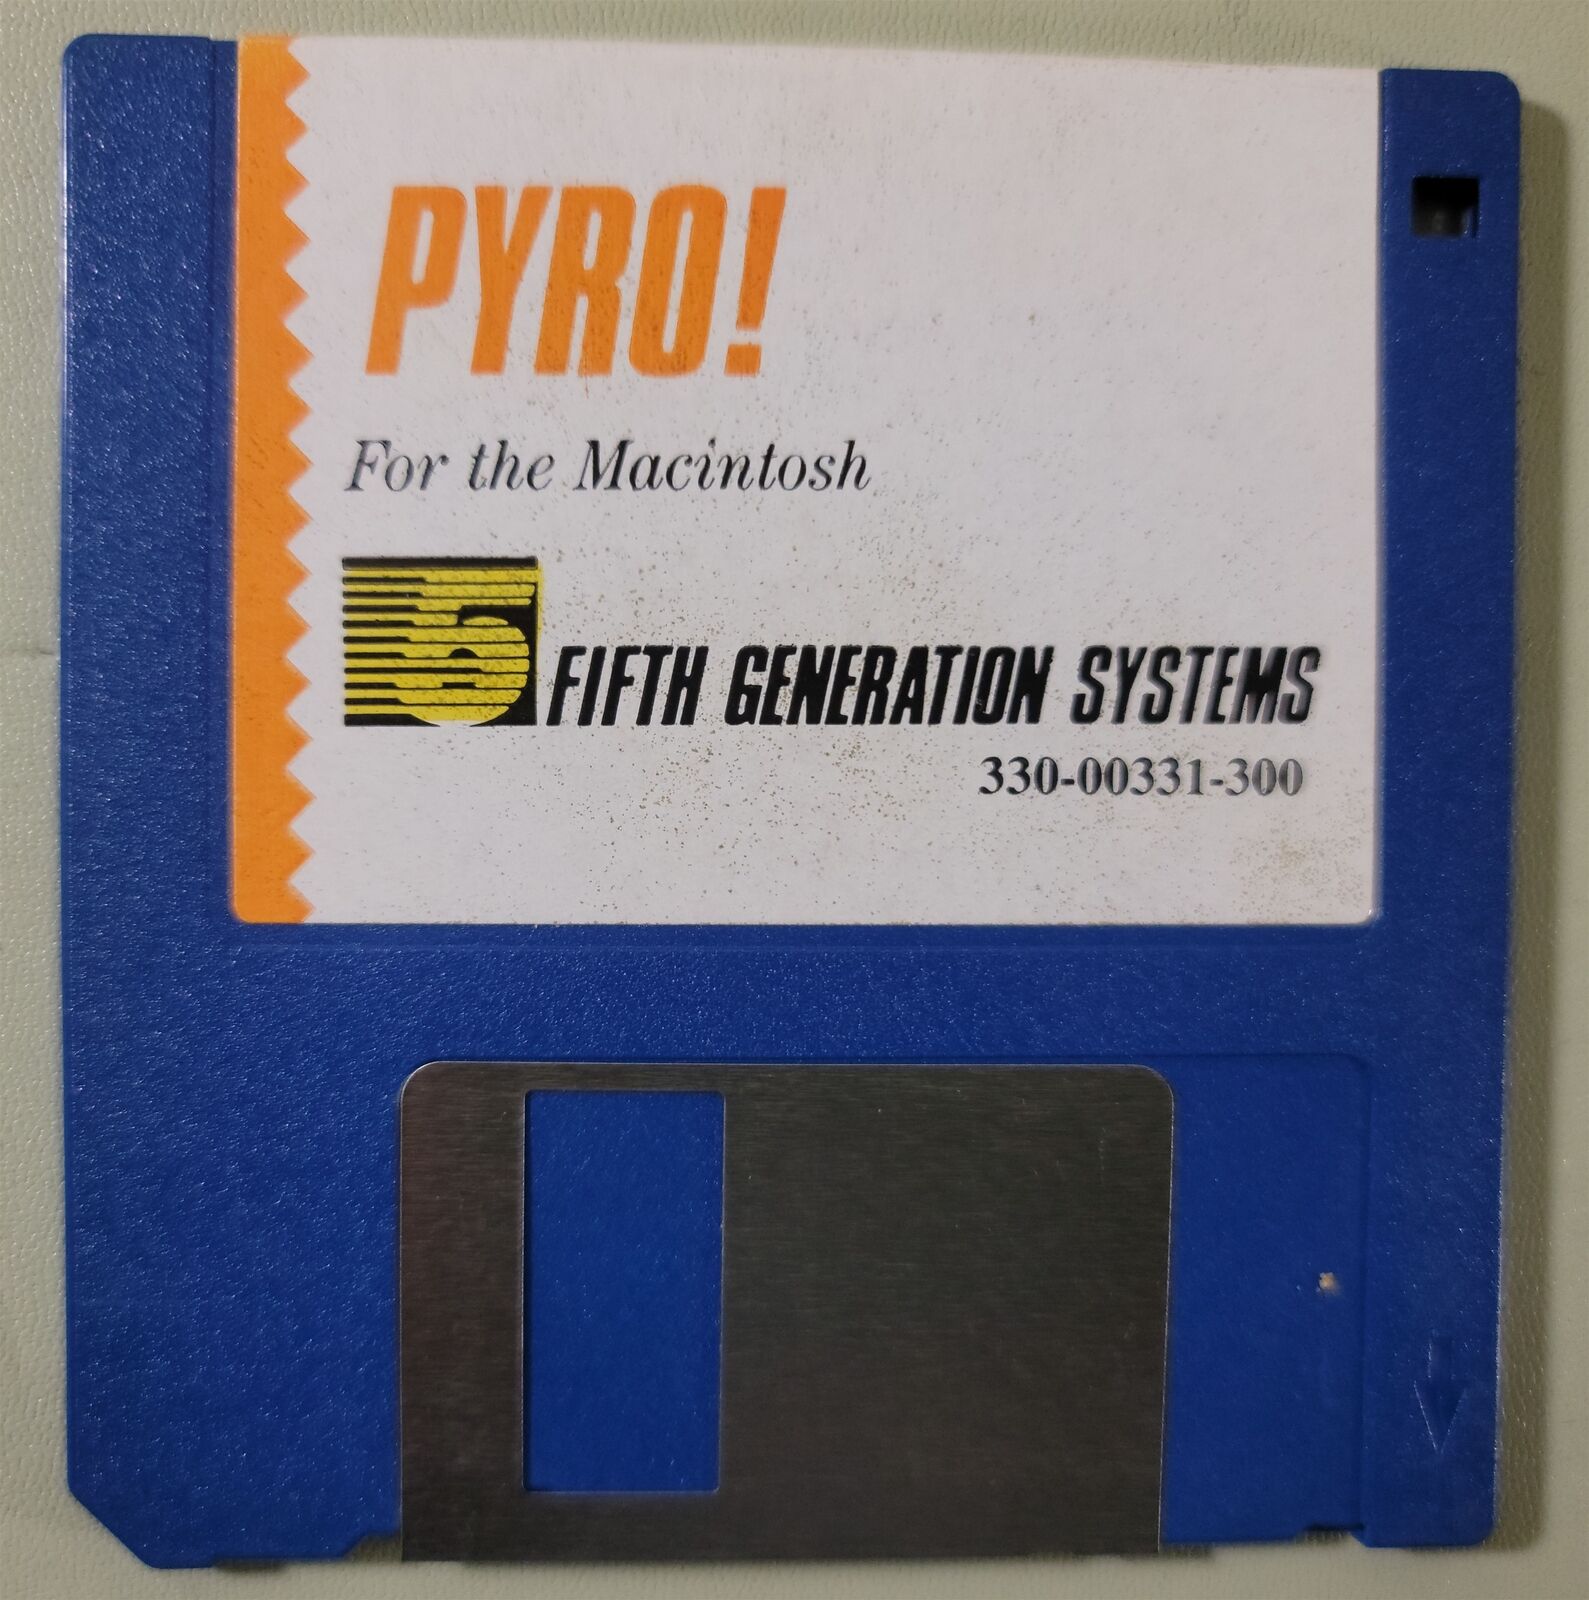 PYRO Screen Saver for Macintosh - Fifth Generation Systems - Disk Media - 1990